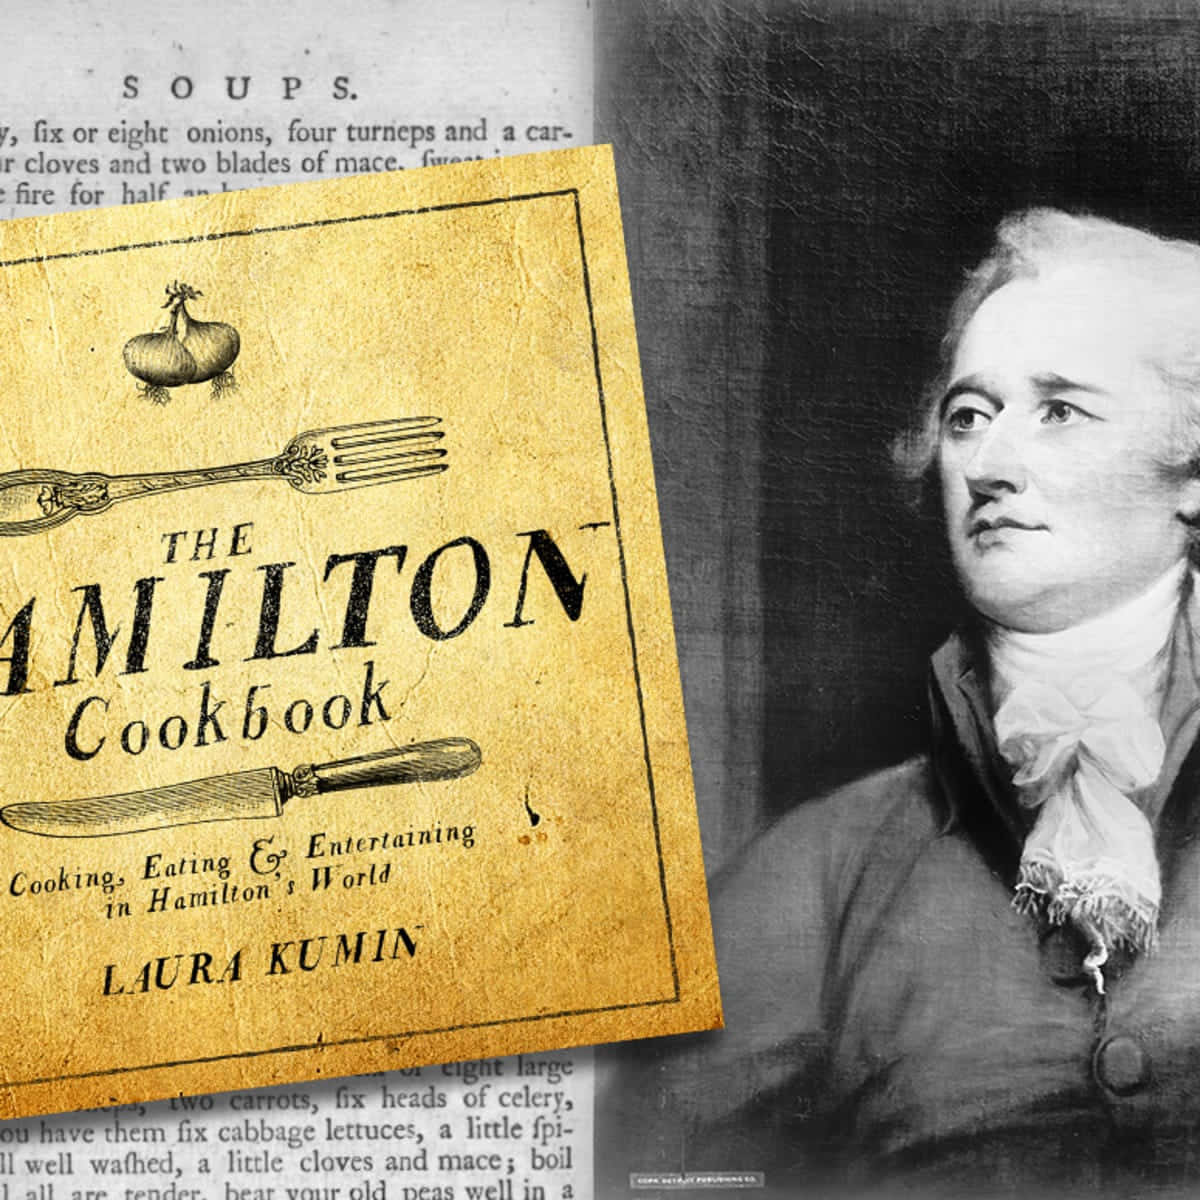 Alexander Hamilton, a Founding Father of the United States of America